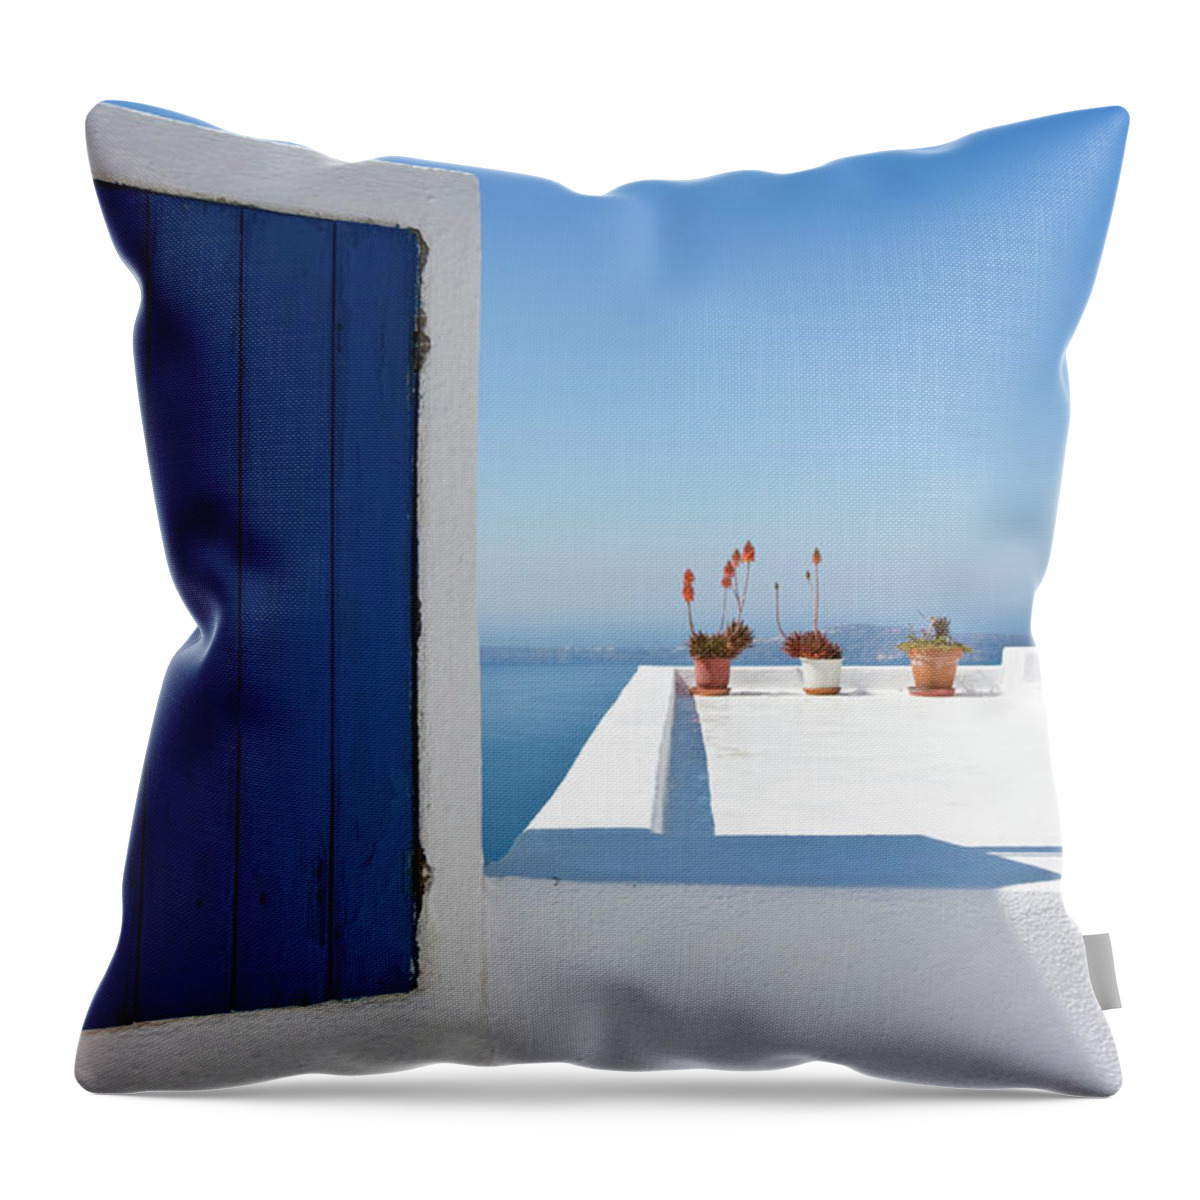 Greek Culture Throw Pillow featuring the photograph Blue Door To Nowhere by Arturbo